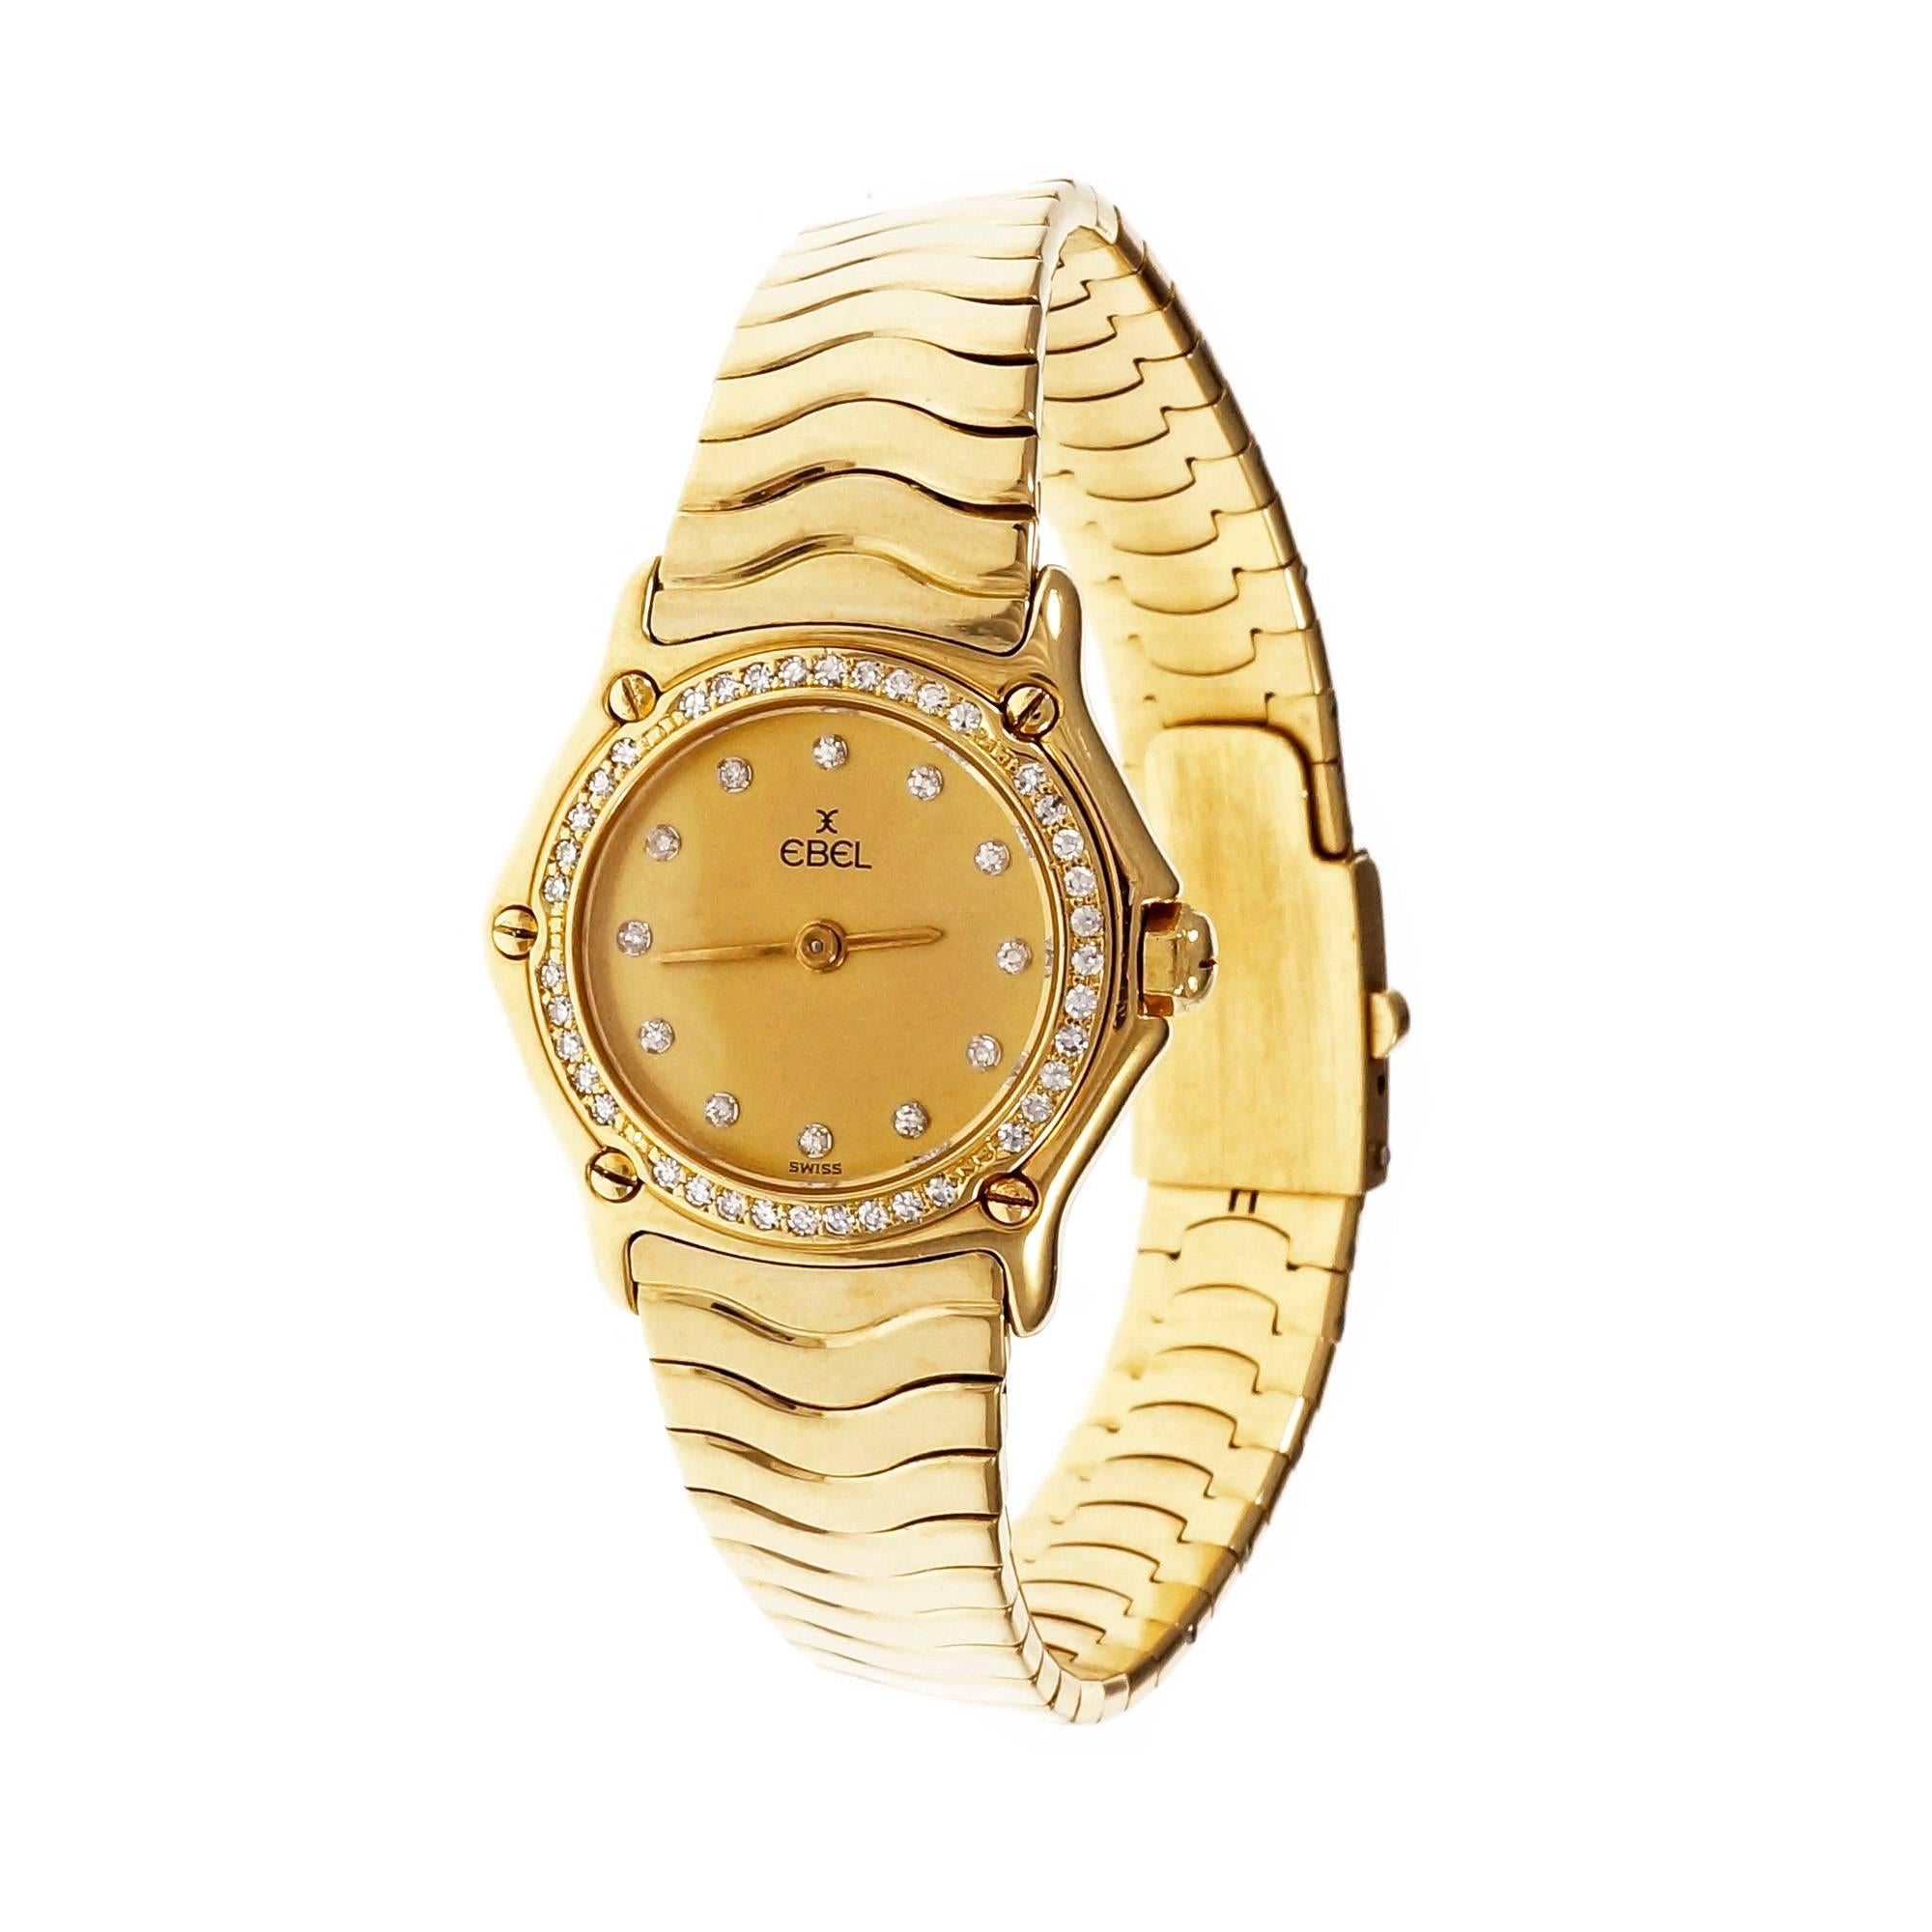 Ladies Ebel Wave wrist watch. All original with solid 18k case and band. Diamond bezel and Diamond dial.

45 diamonds aprox. total weight: .50ct. 
18k yellow gold
Band length: 6 3/8 inches
58.5 grams
Length: 26mm
Width: 23mm
Band width at case: